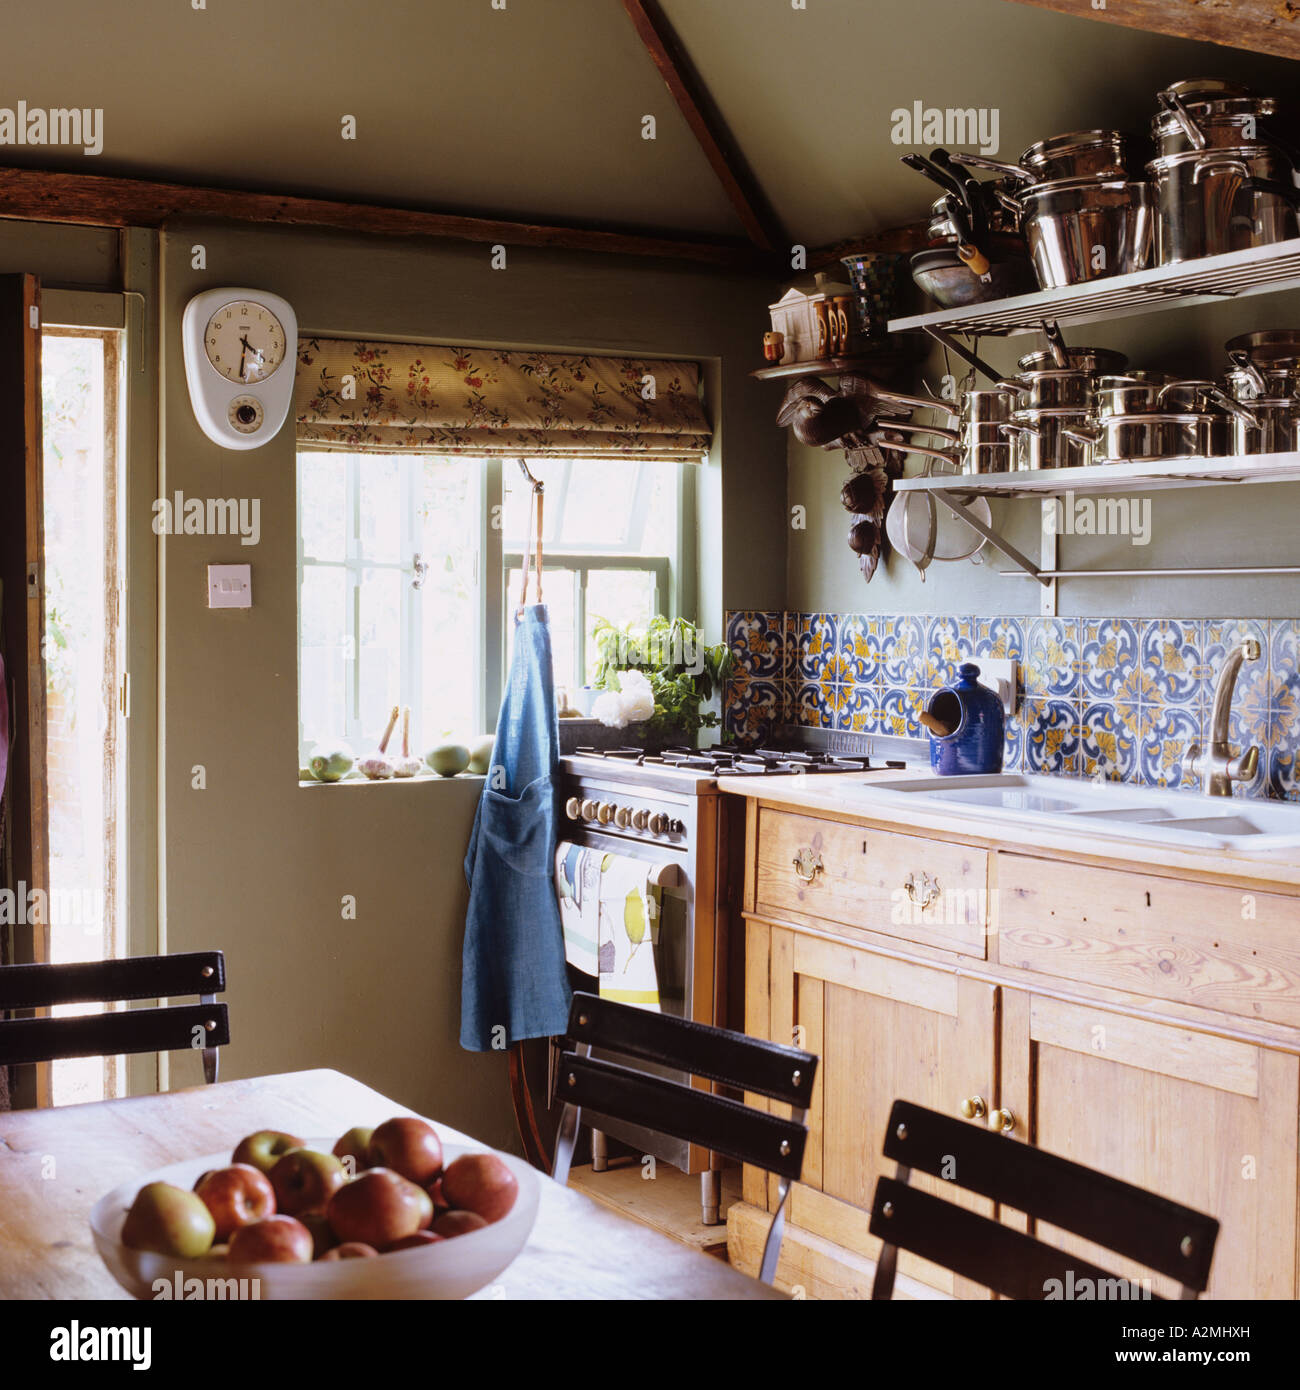 A country kitchen Stock Photo